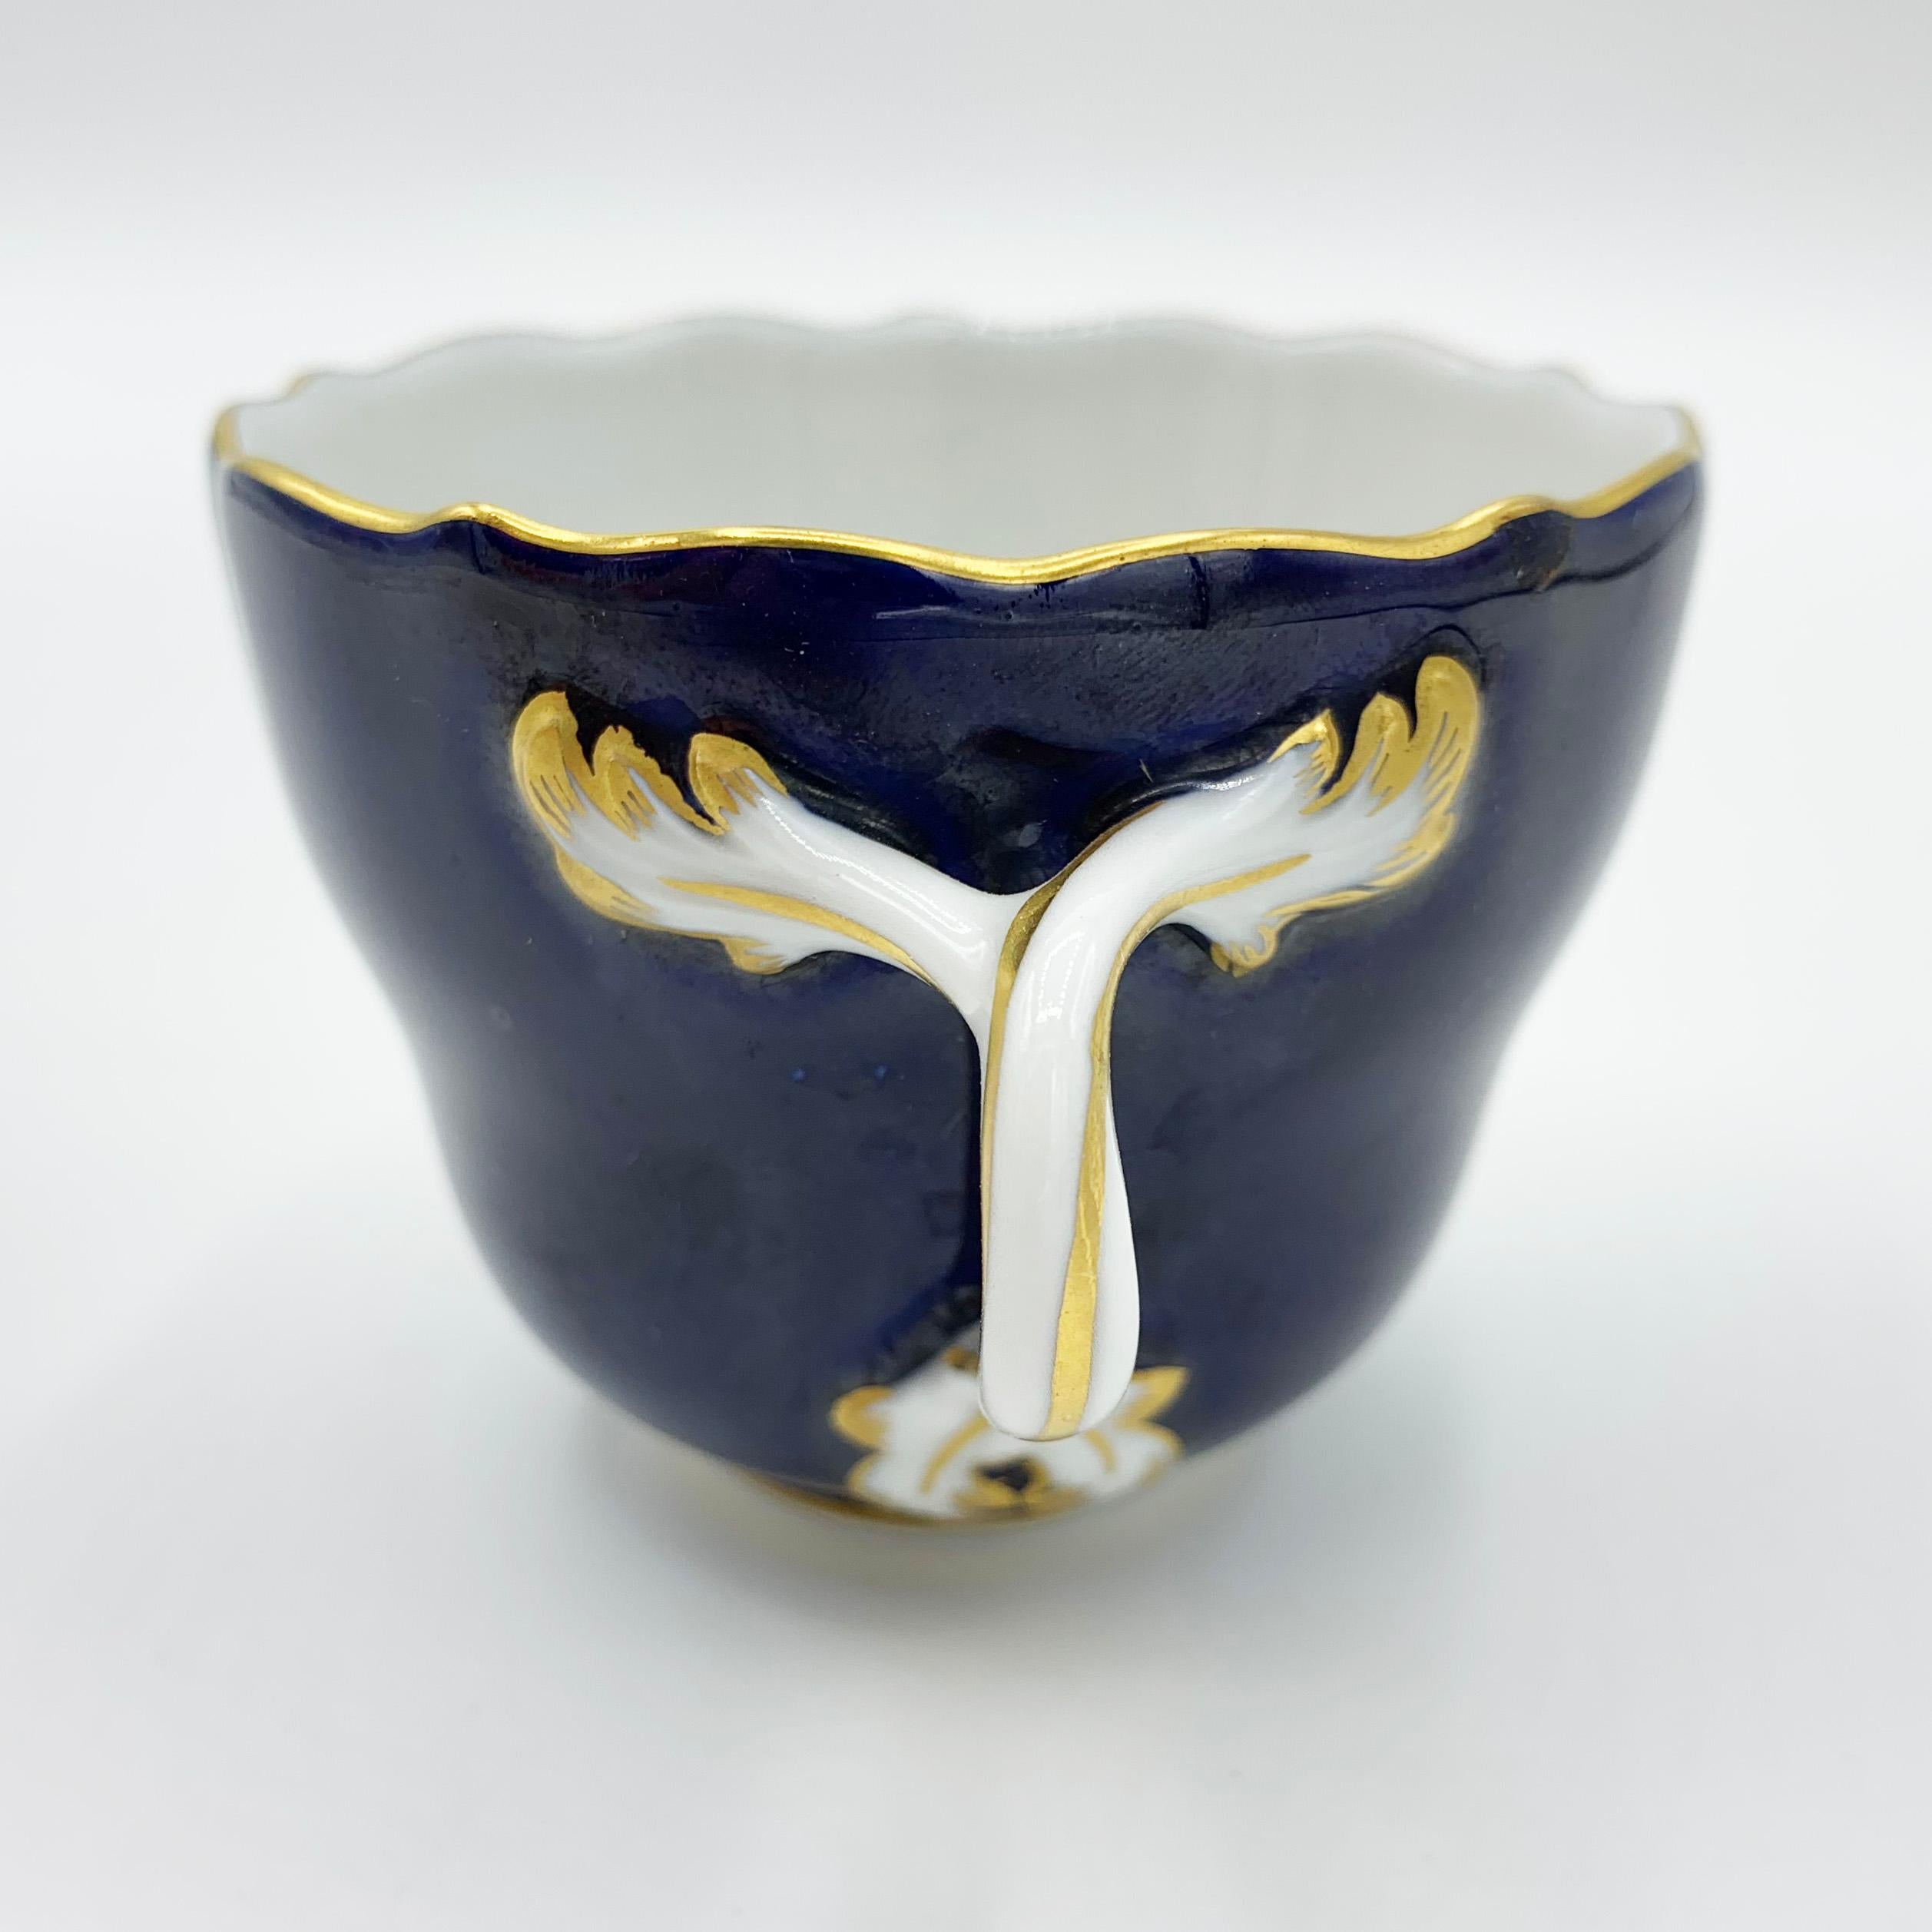 Mid-20th century Meissen Porcelain collecting cup cobalt blue & flower painting gold decoration.
Decor: cobalt blue background with bouquet of flowers.
Saucer diameter approx. 7.5 cm and height approx.2cm.
Cup diameter approx. 6.5 cm and height